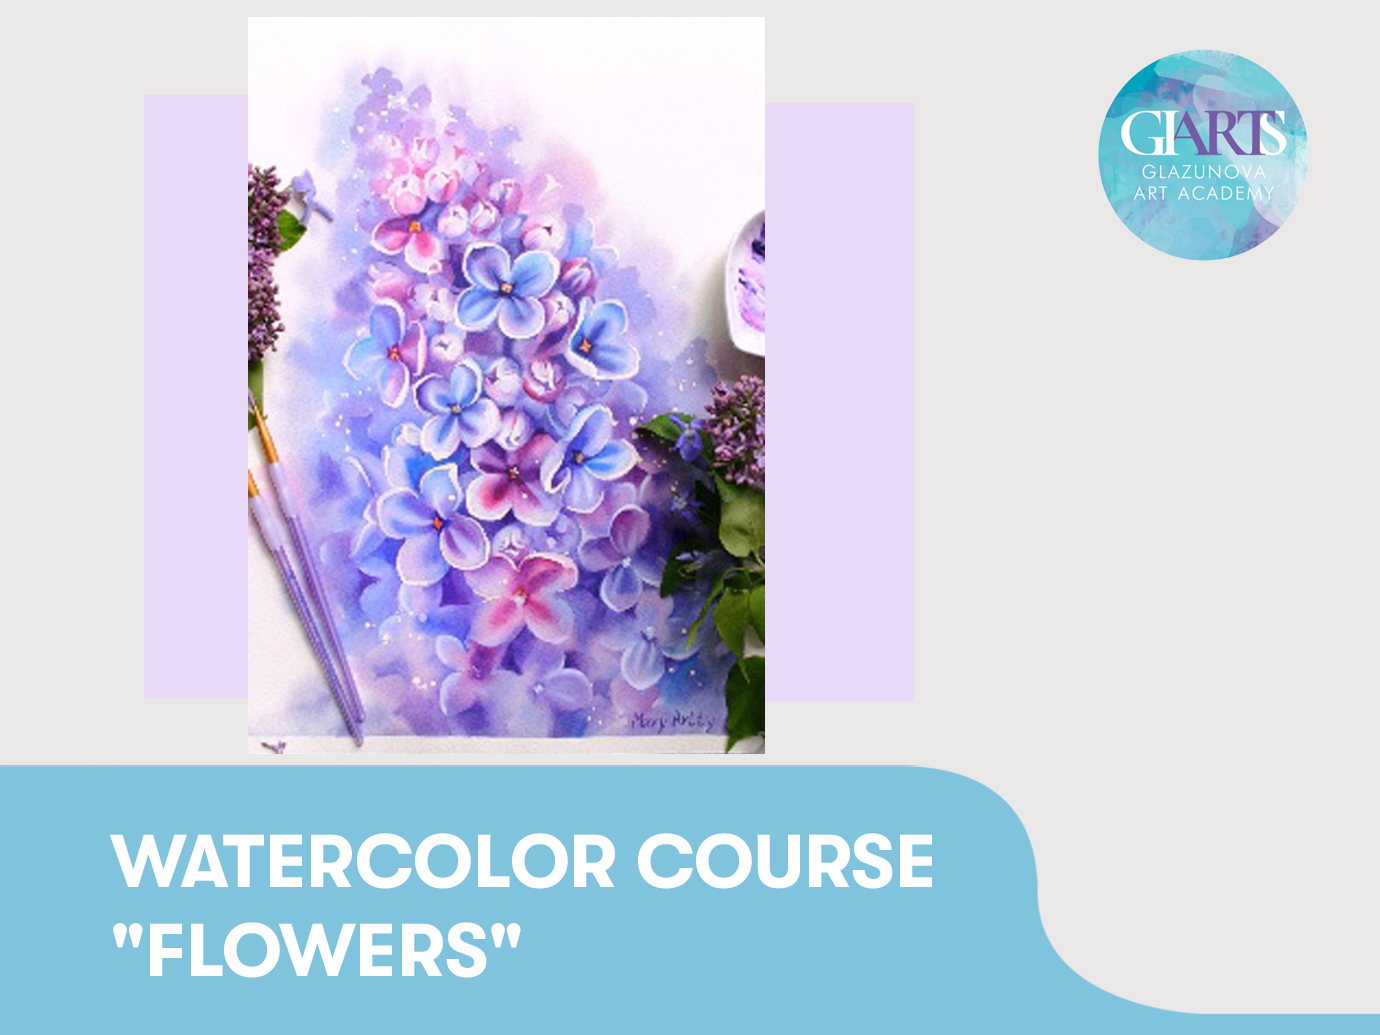 Watercolor course “Flowers“